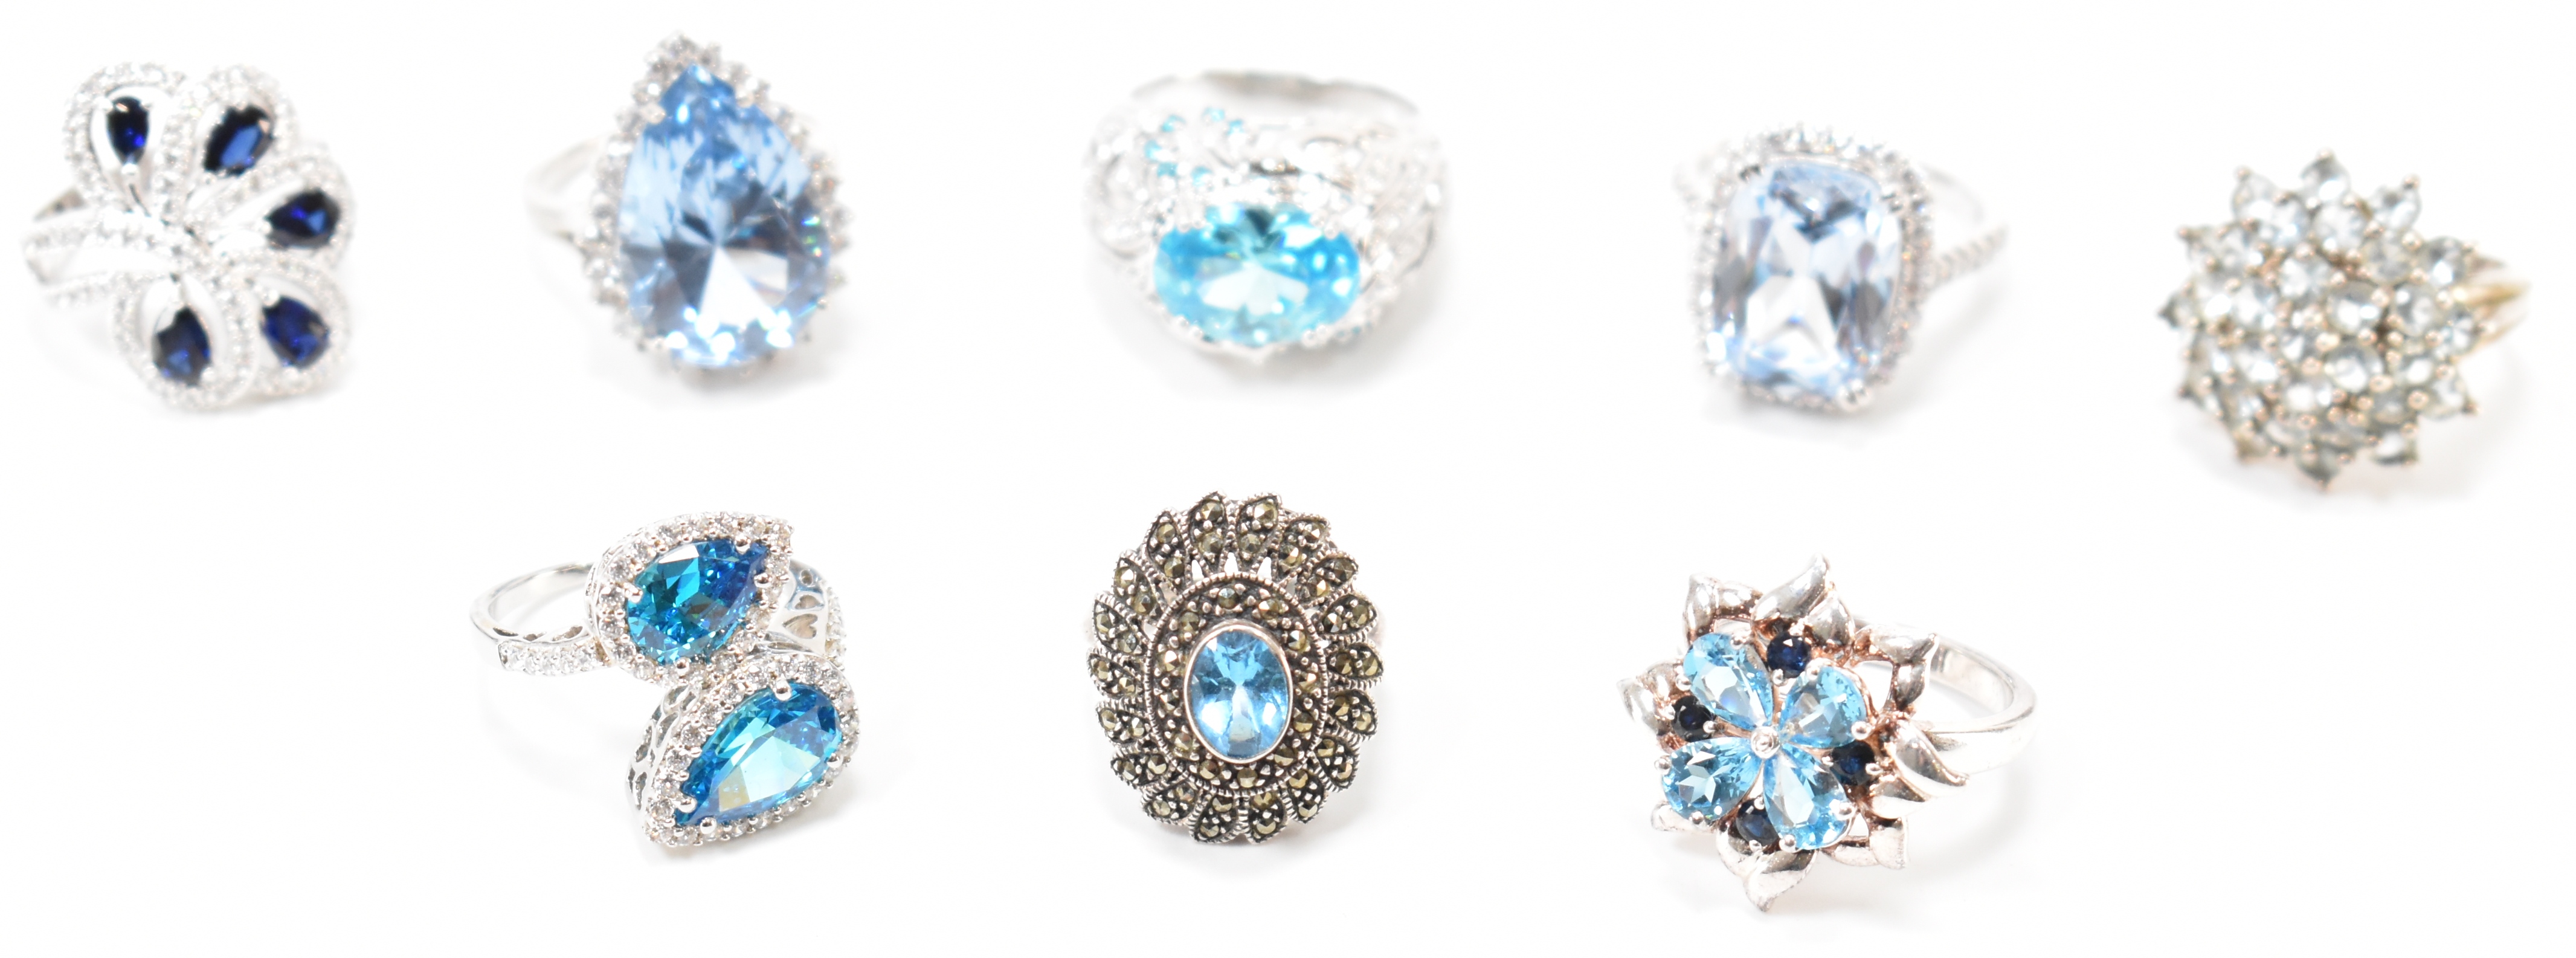 GROUP OF 925 SILVER BLUE STONE SET RINGS - Image 3 of 4